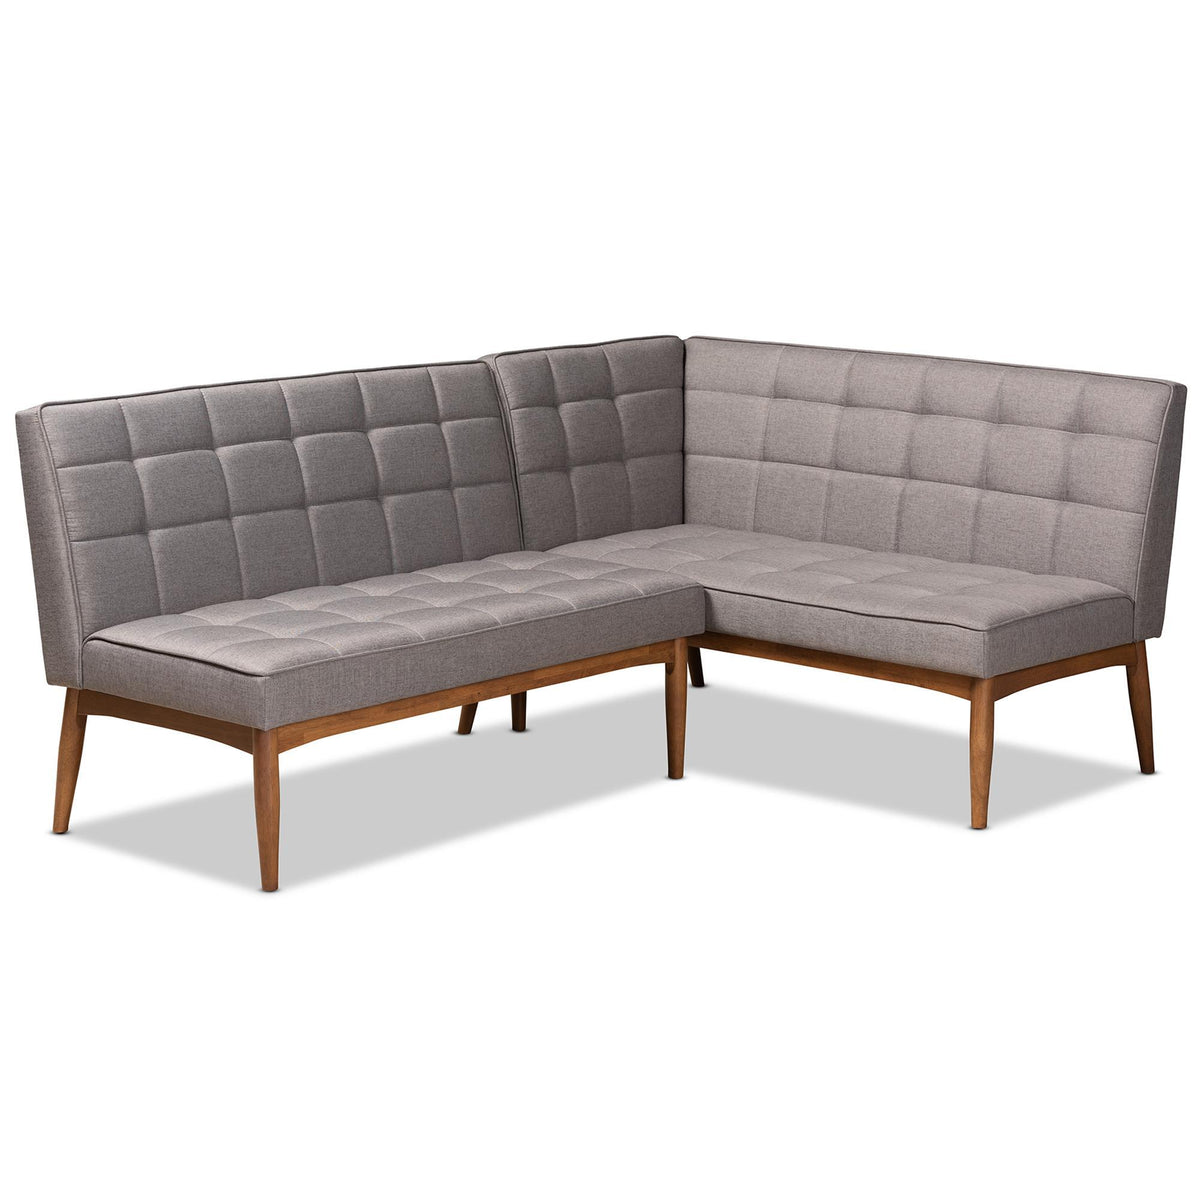 Baxton Studio Sanford Mid-Century Modern Grey Fabric Upholstered And Walnut Brown Finished Wood 2-Piece Dining Nook Banquette Set - BBT8051.11-Grey/Walnut-2PC SF Bench